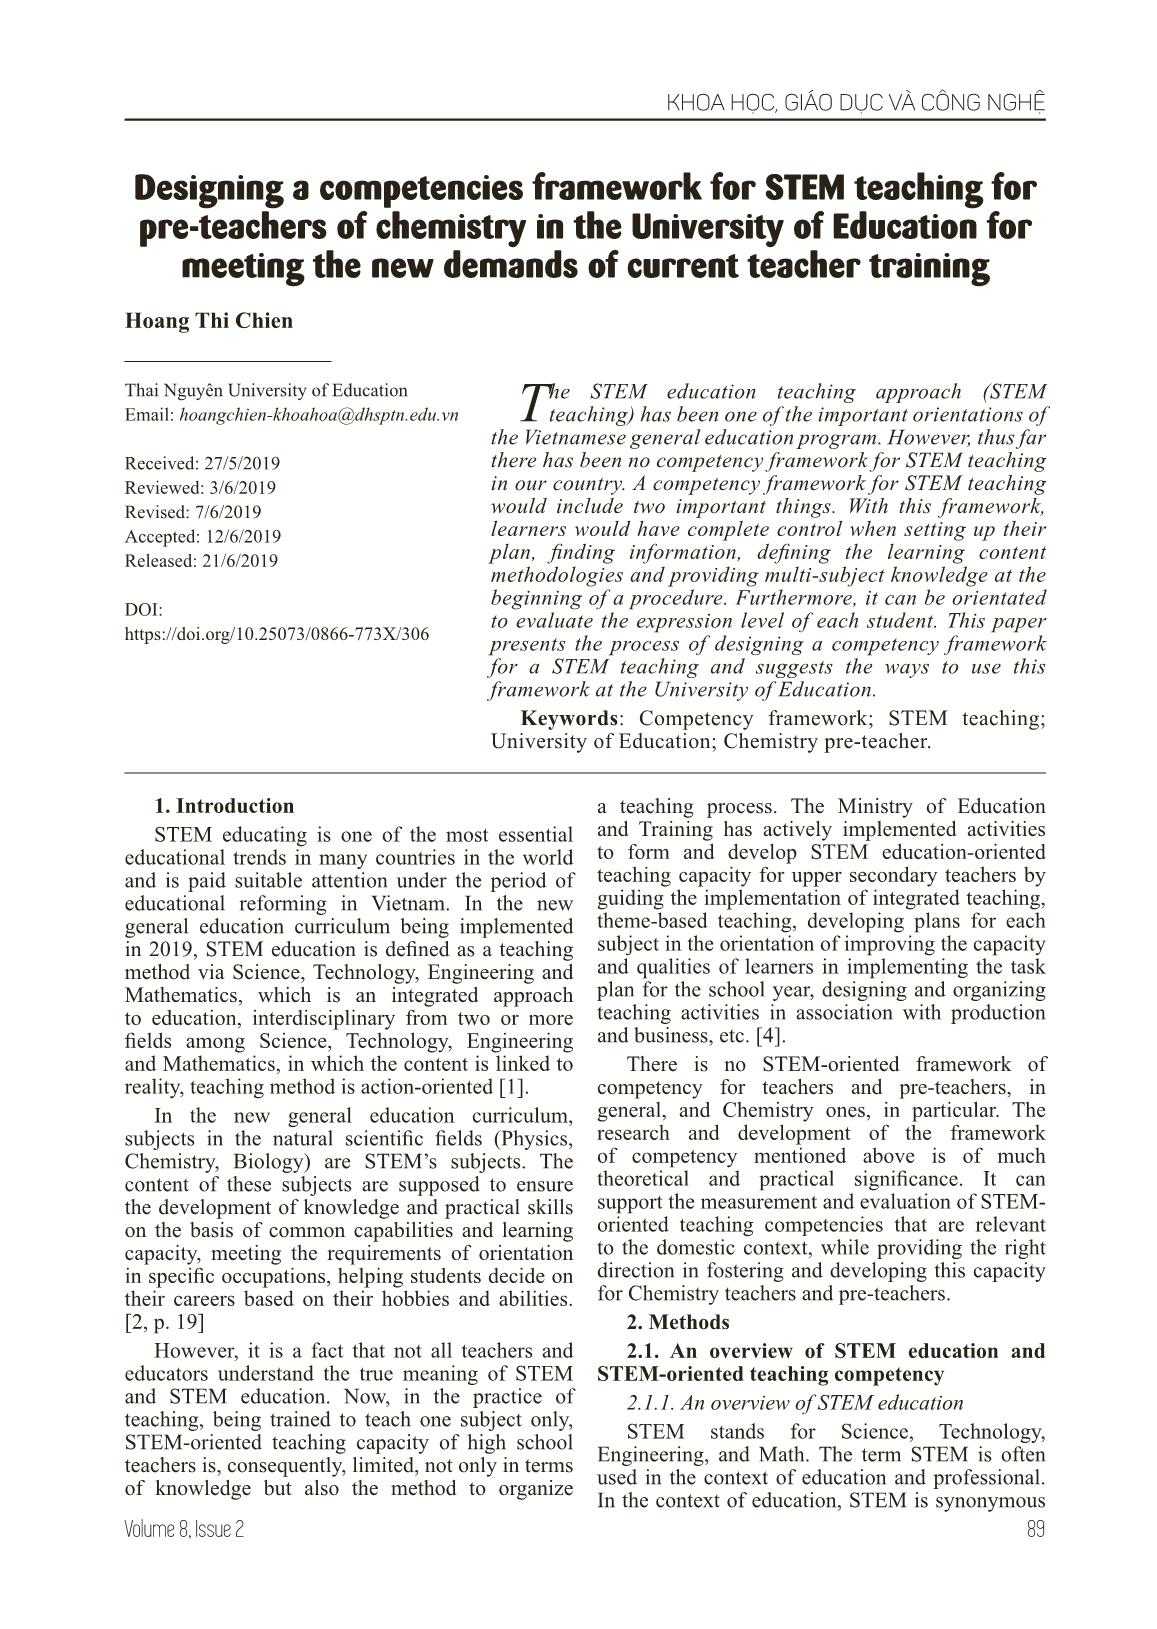 Designing a competencies framework for STEM teaching for pre-Teachers of chemistry in the University of Education for meeting the new demands of current teacher training trang 1